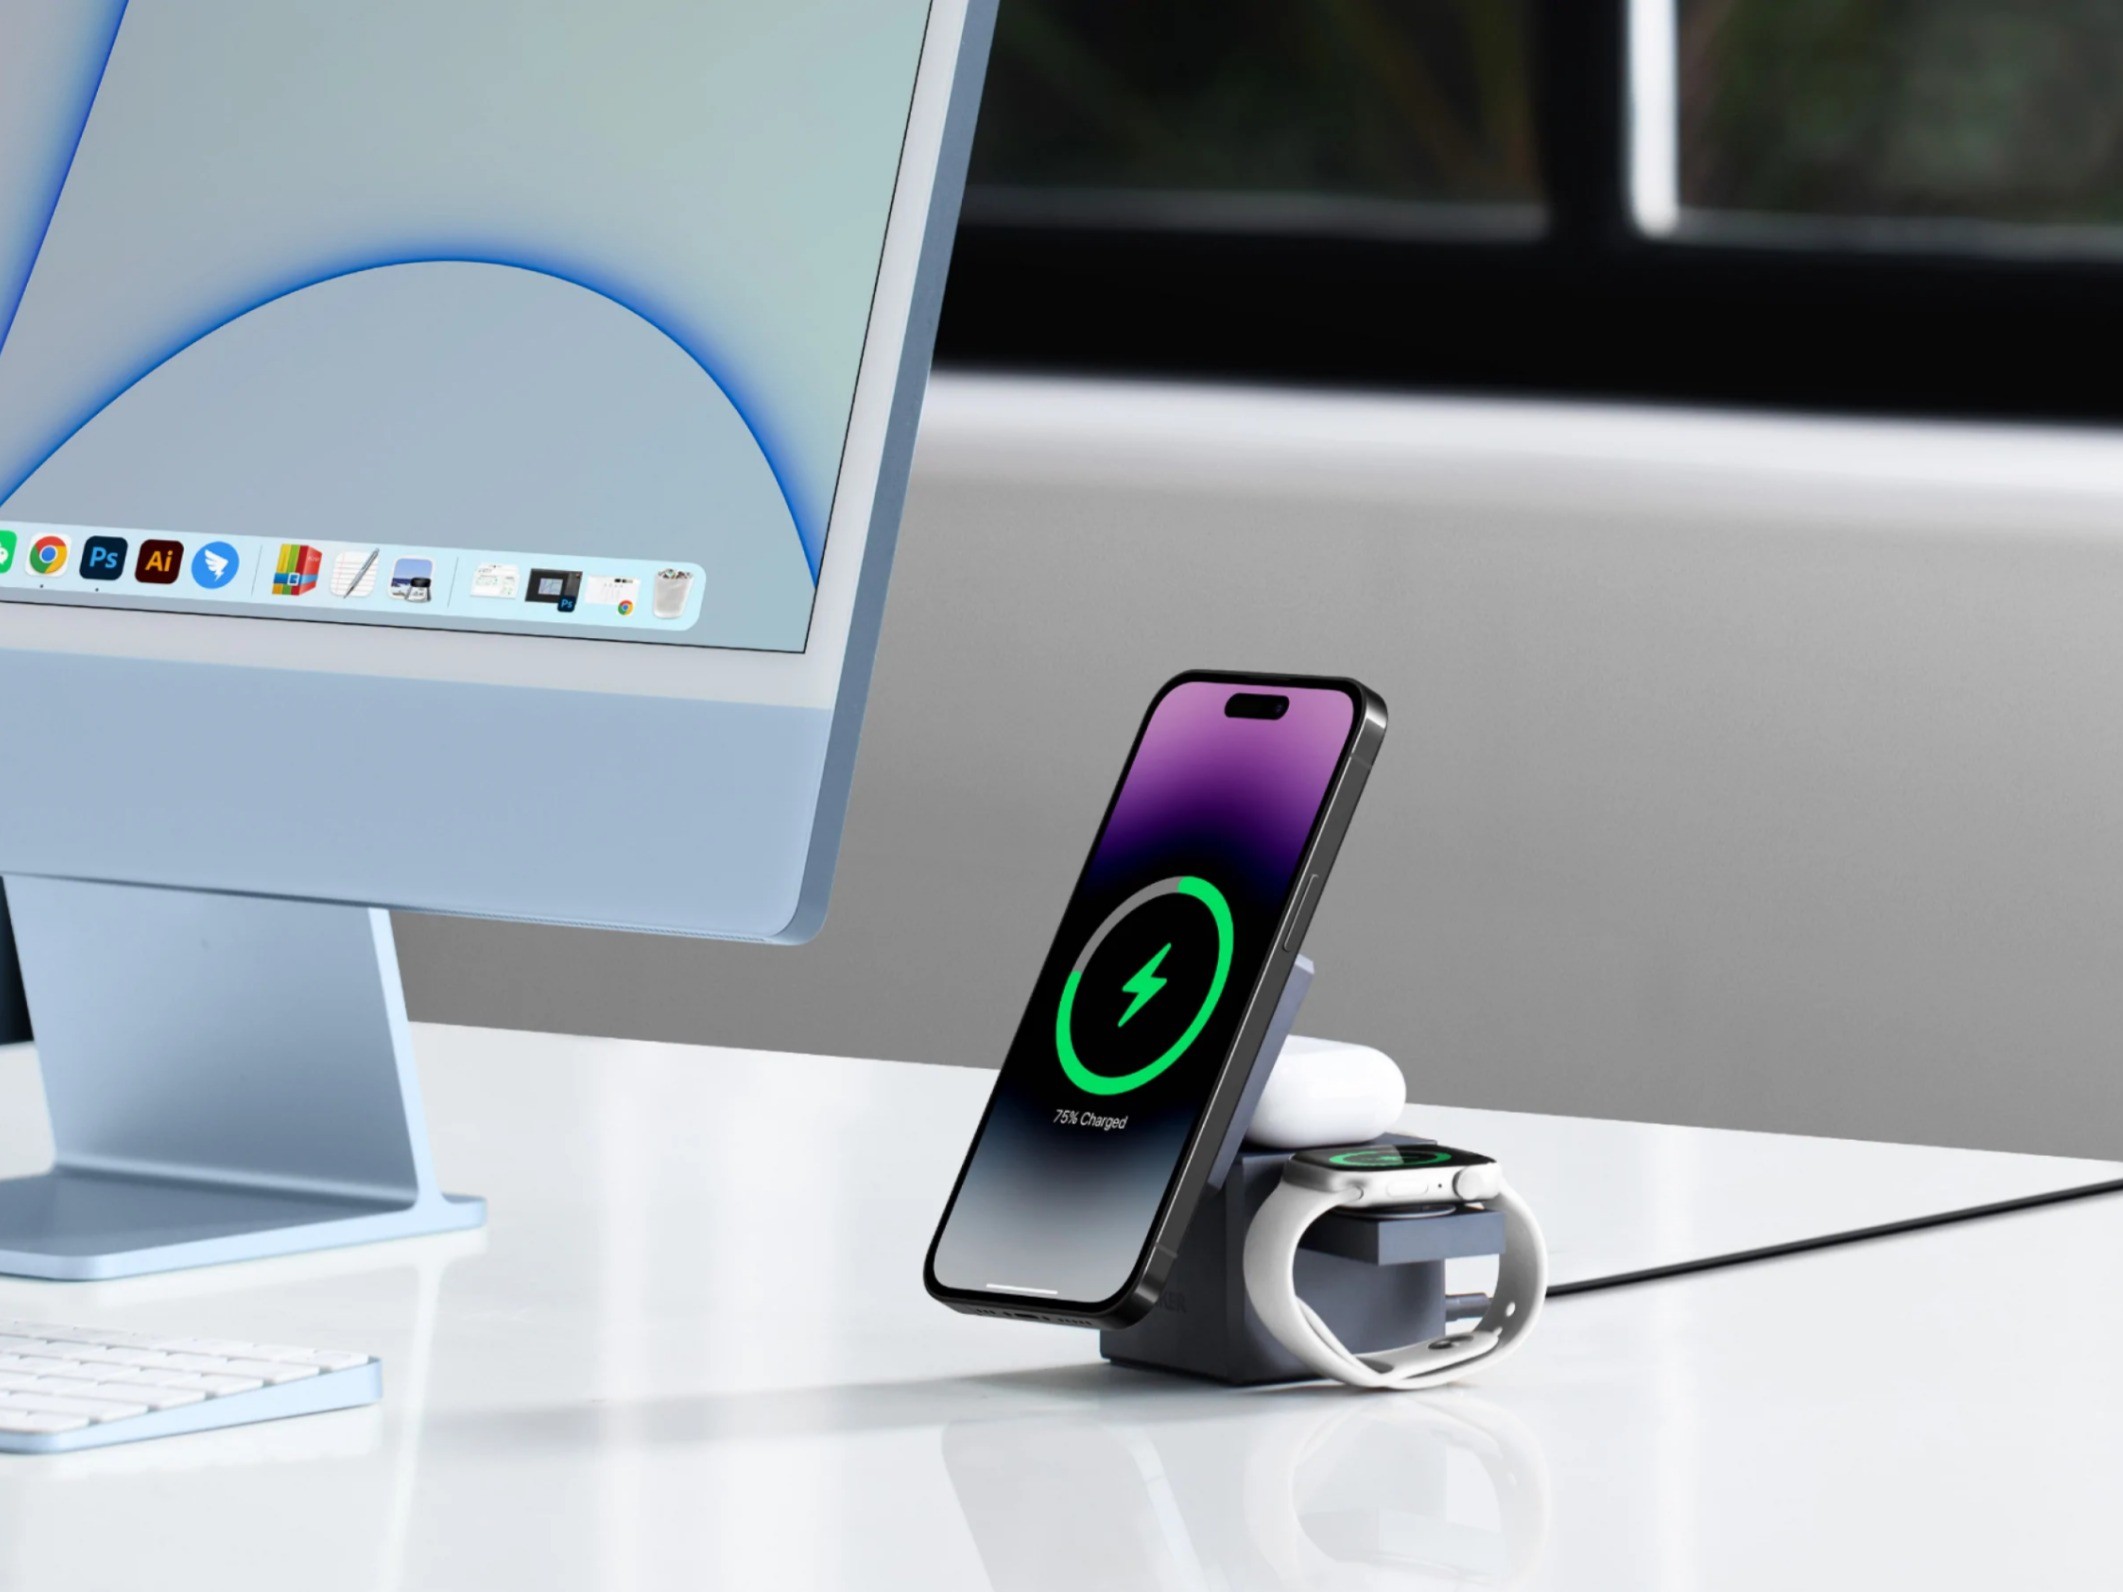 Anker MagSafe 3-in-1 Cube: Can it fast charge the Apple Watch? 